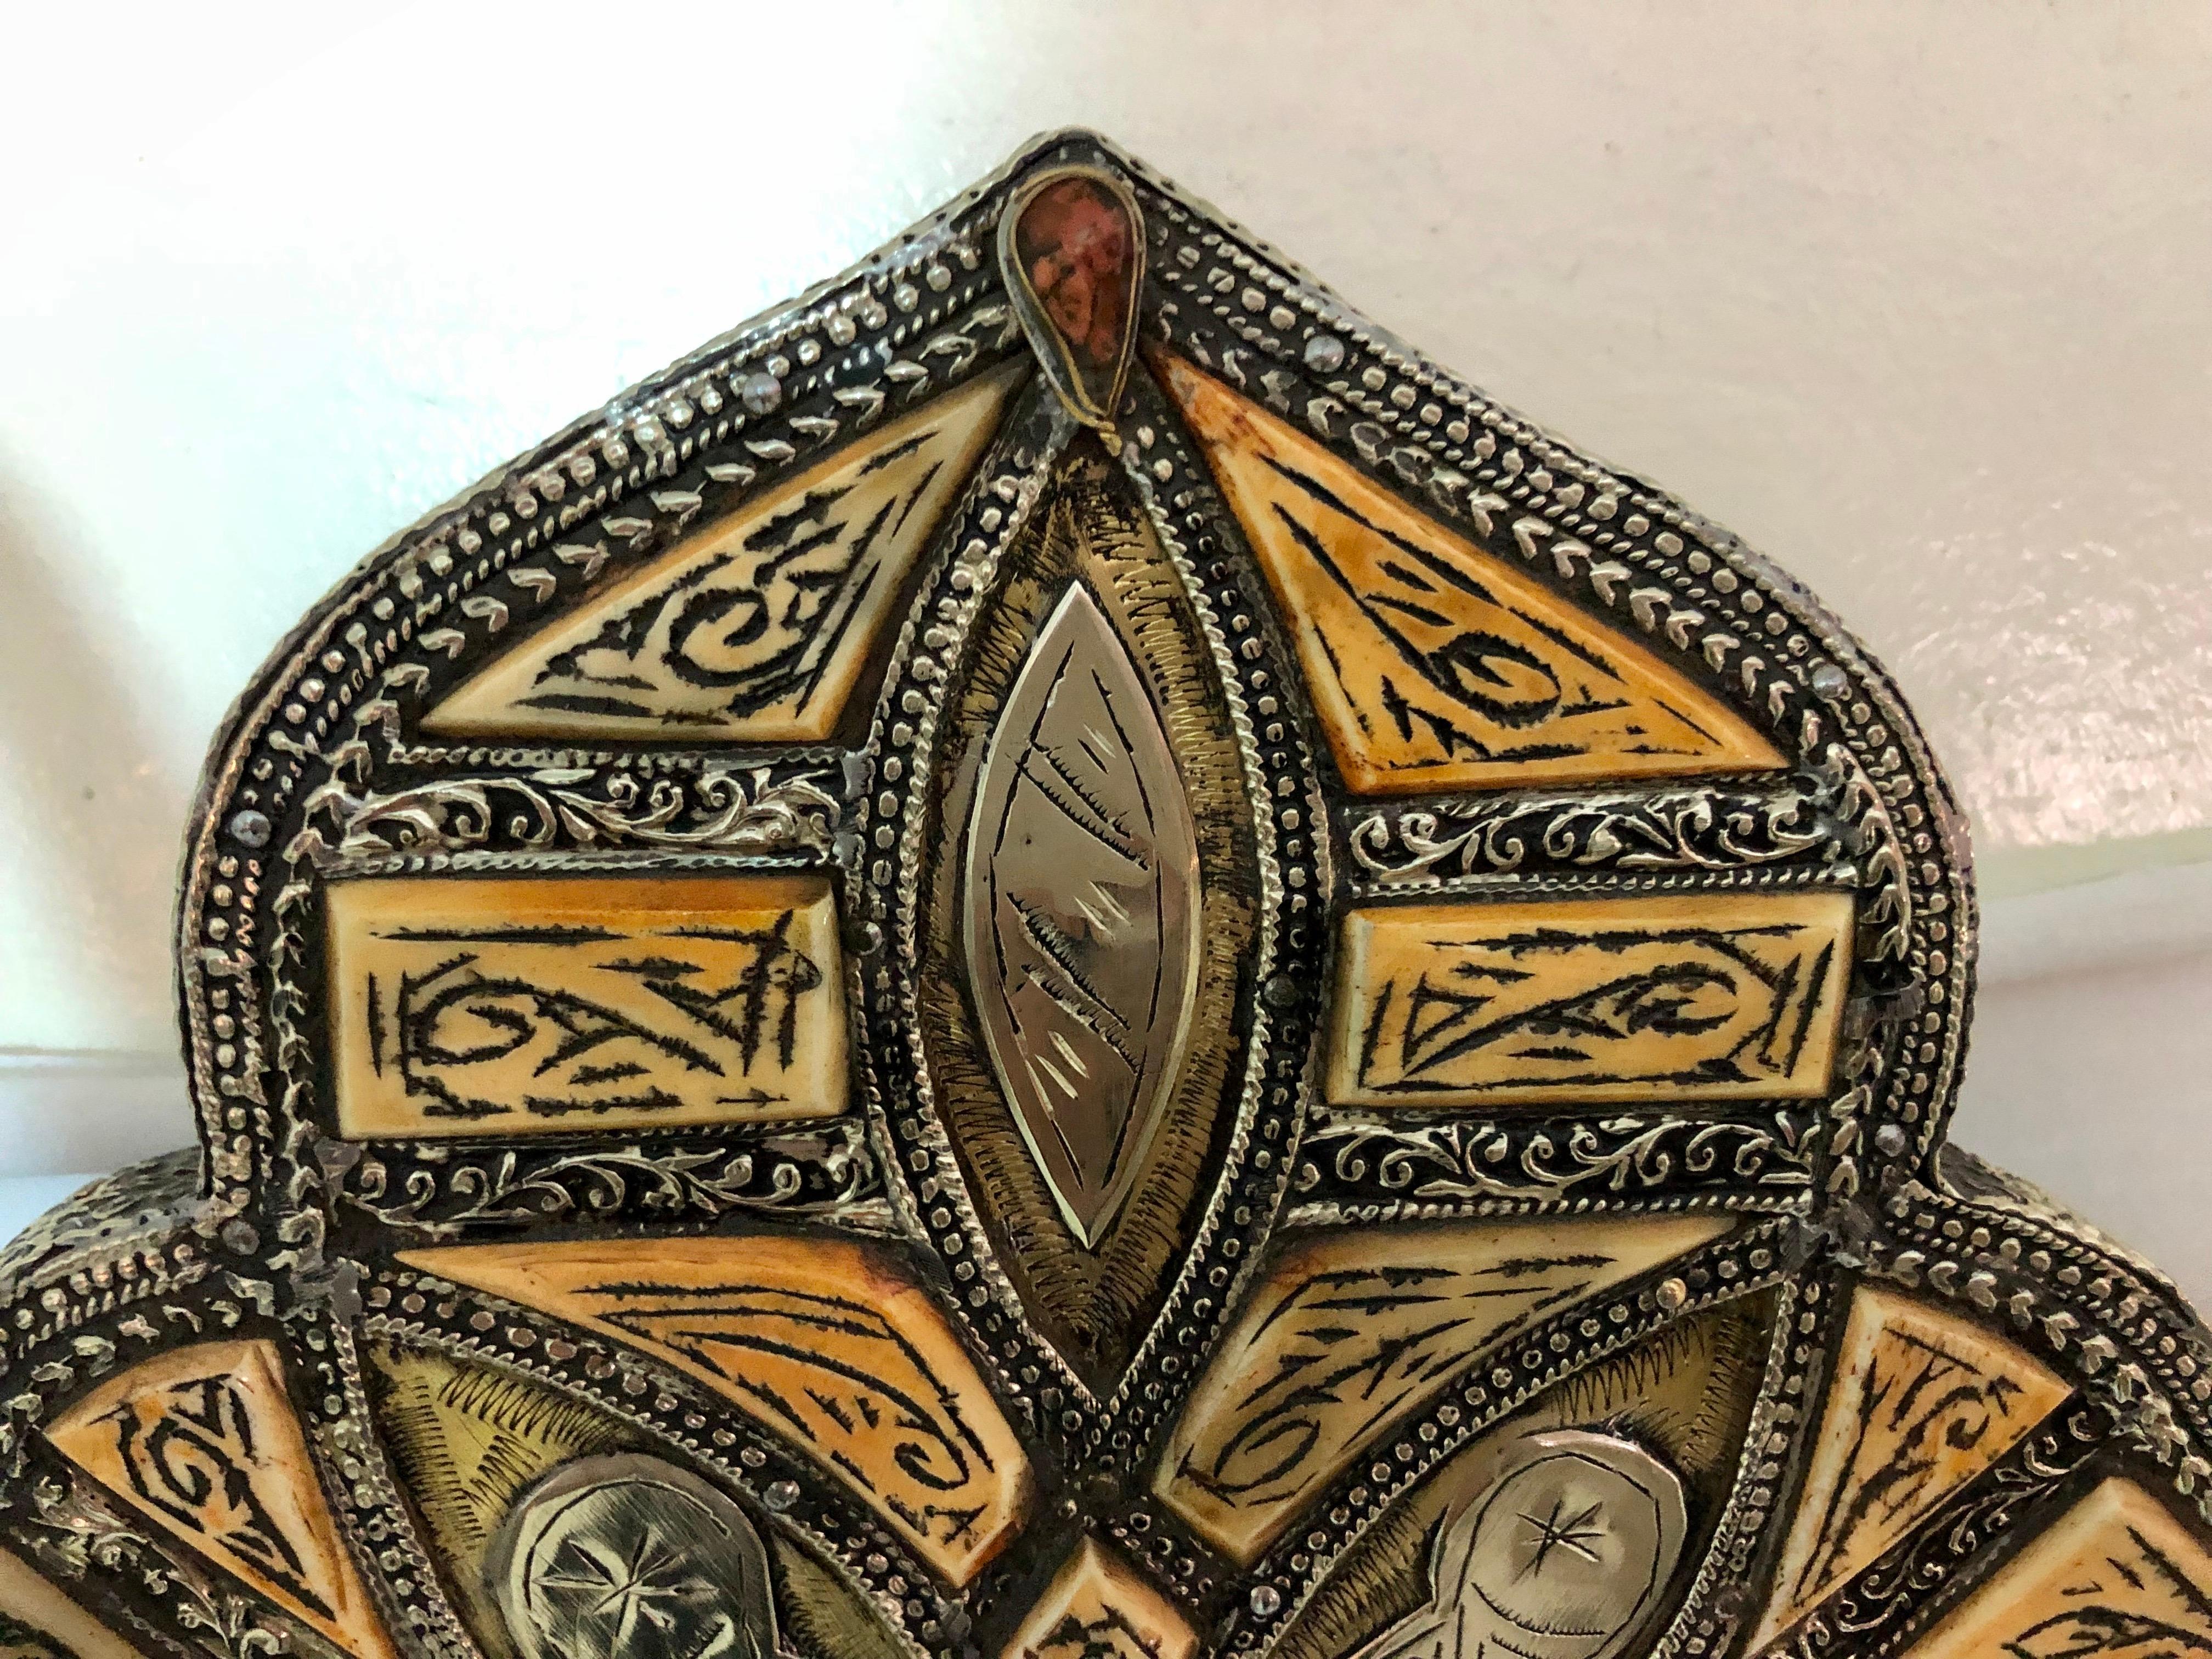 An antique arched Moroccan vanity or wall mirror, handmade of natural bone and engraved with beautiful tribal designs. The mirror frame is inlaid in brass that show beautiful aging discoloration. Simply exquisite!
 